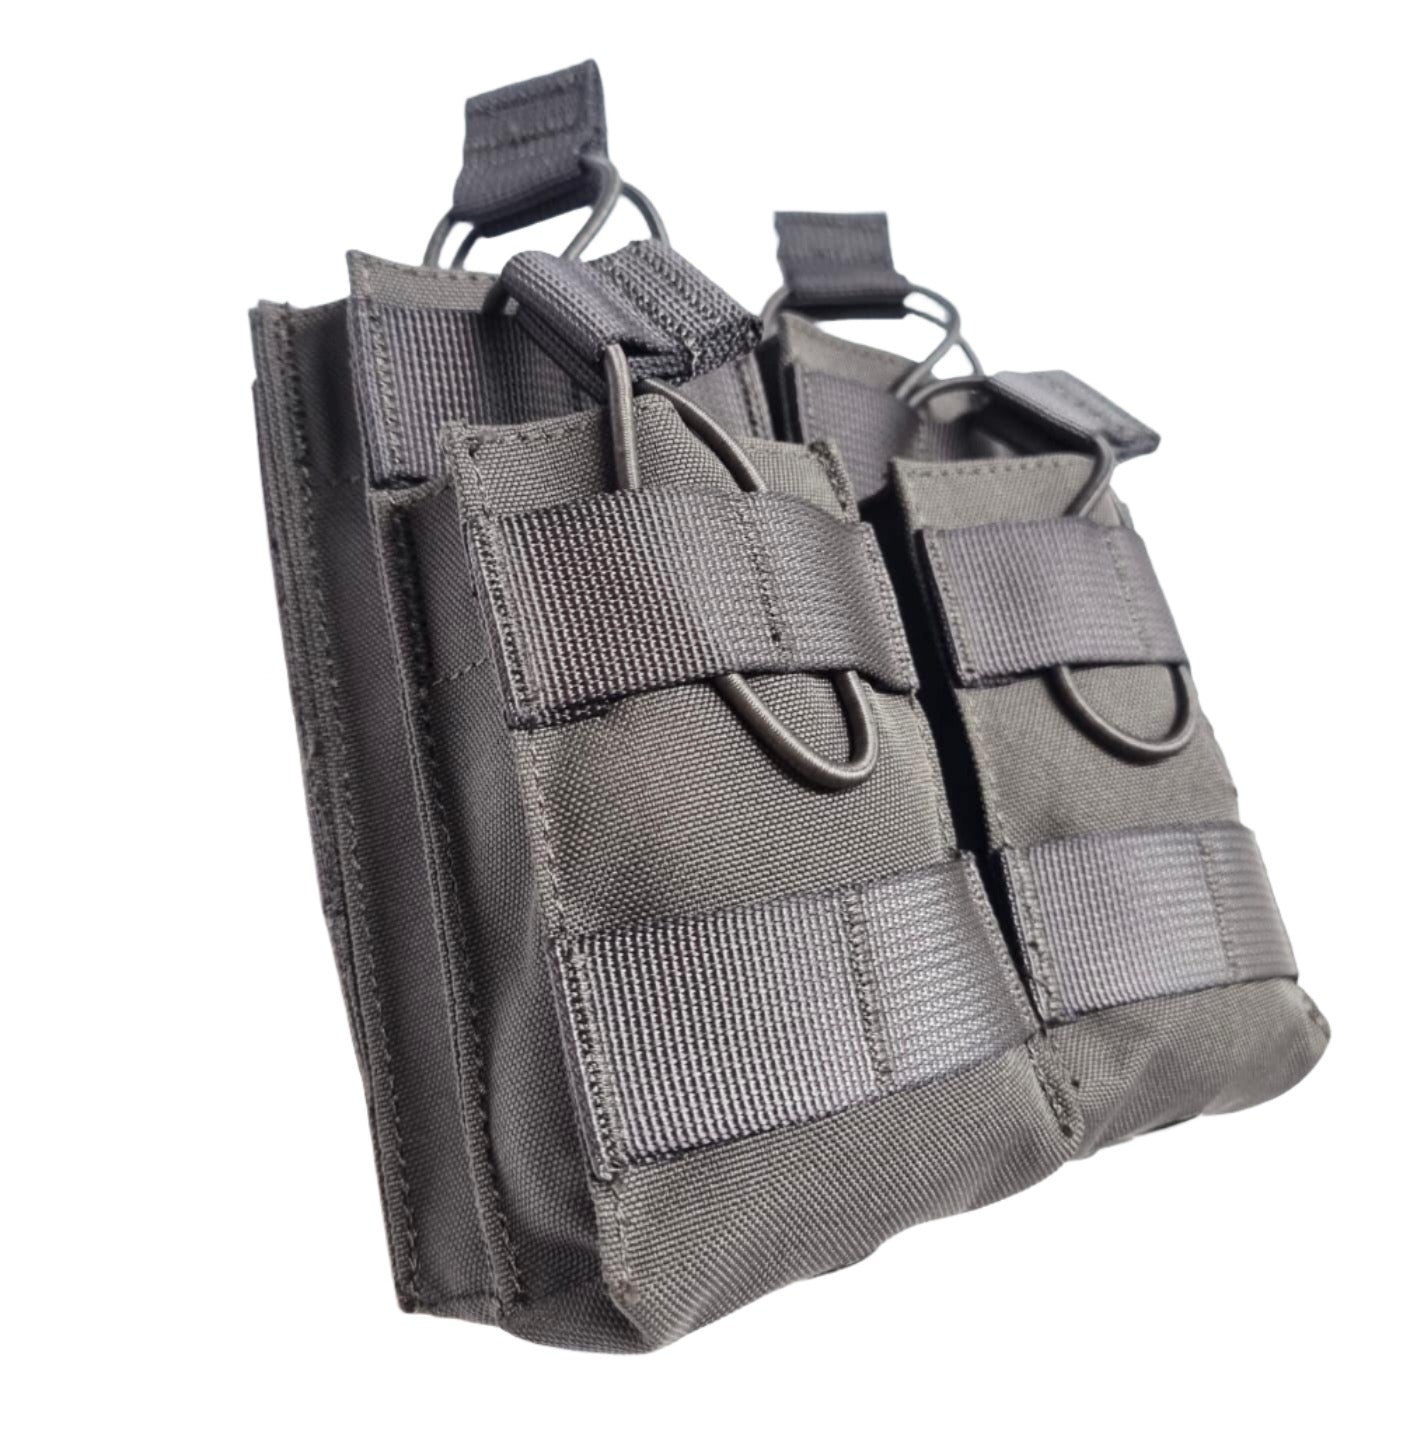 SHS - 996 STACKER OPEN-TOP MAG POUCH DOUBLE COLOUR GREY SIDE VIEW